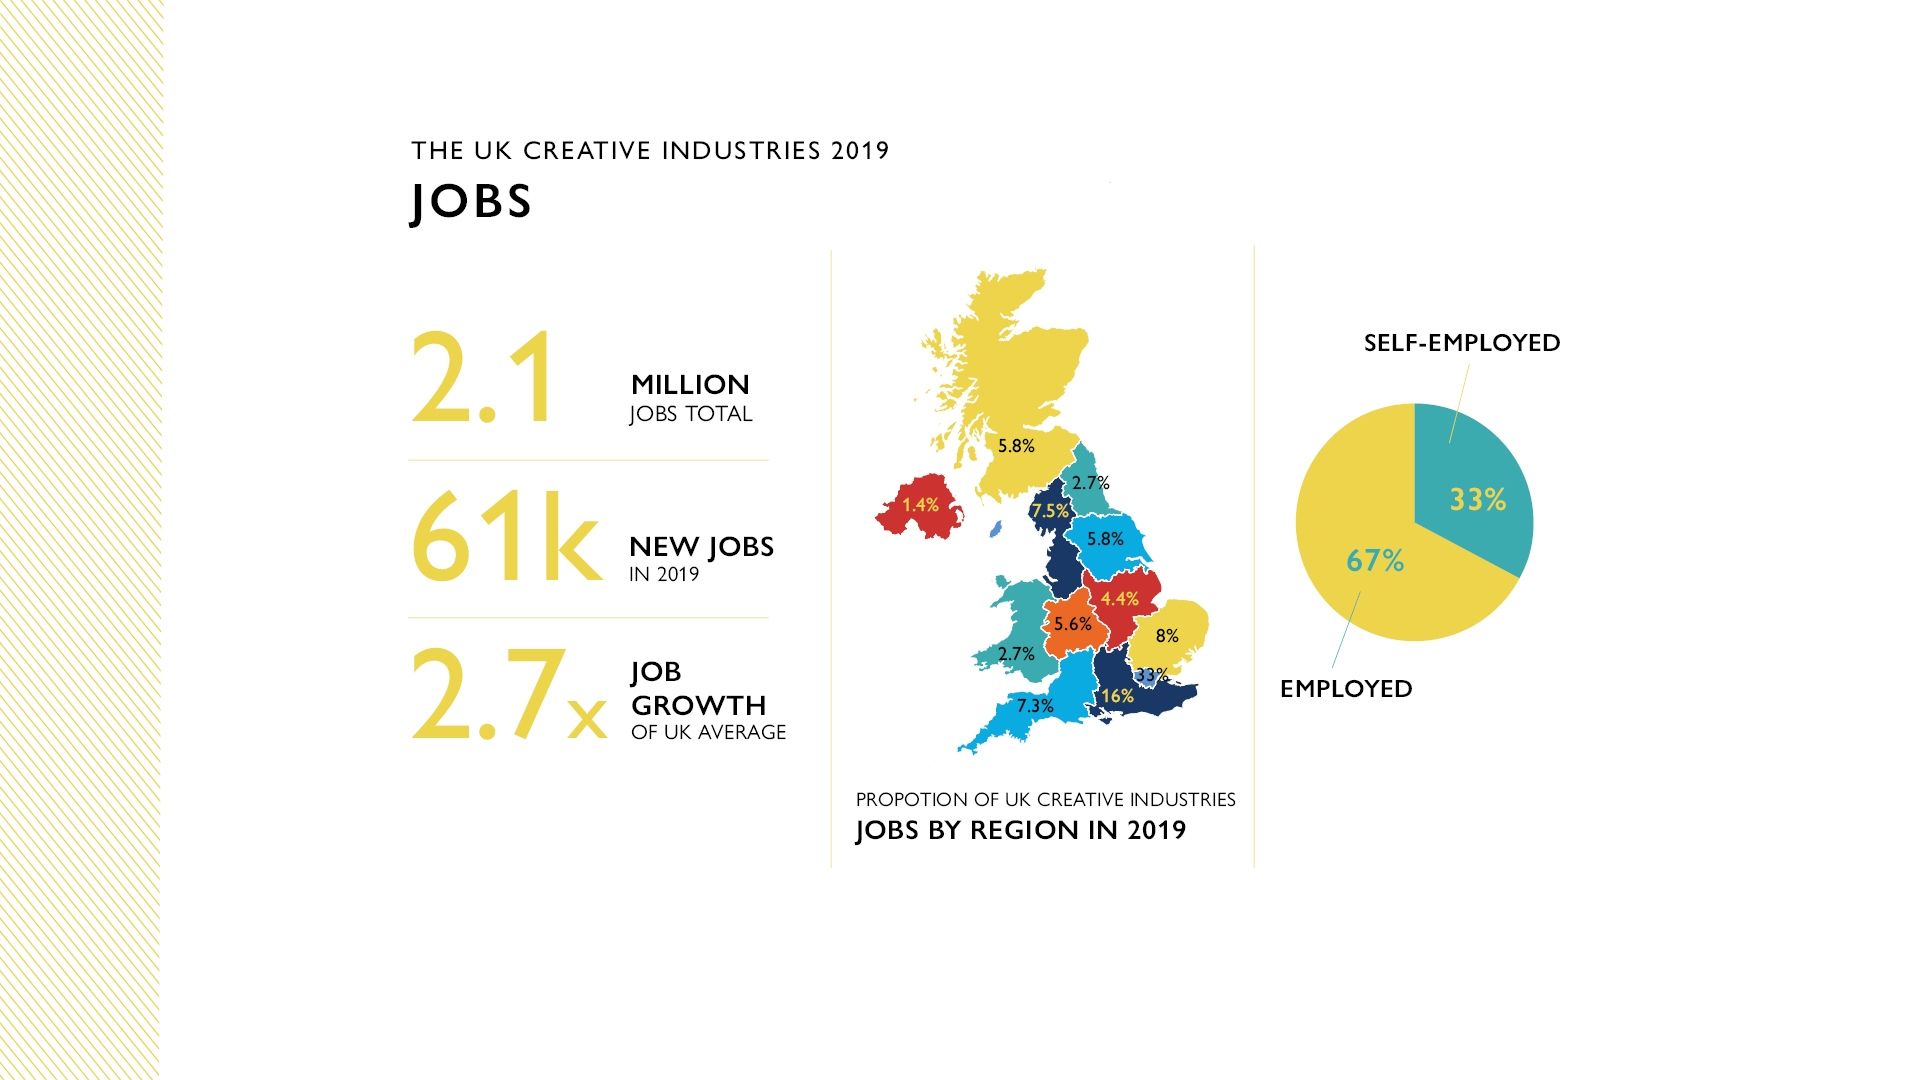 Infographic showing jobs' stats for the creative industry